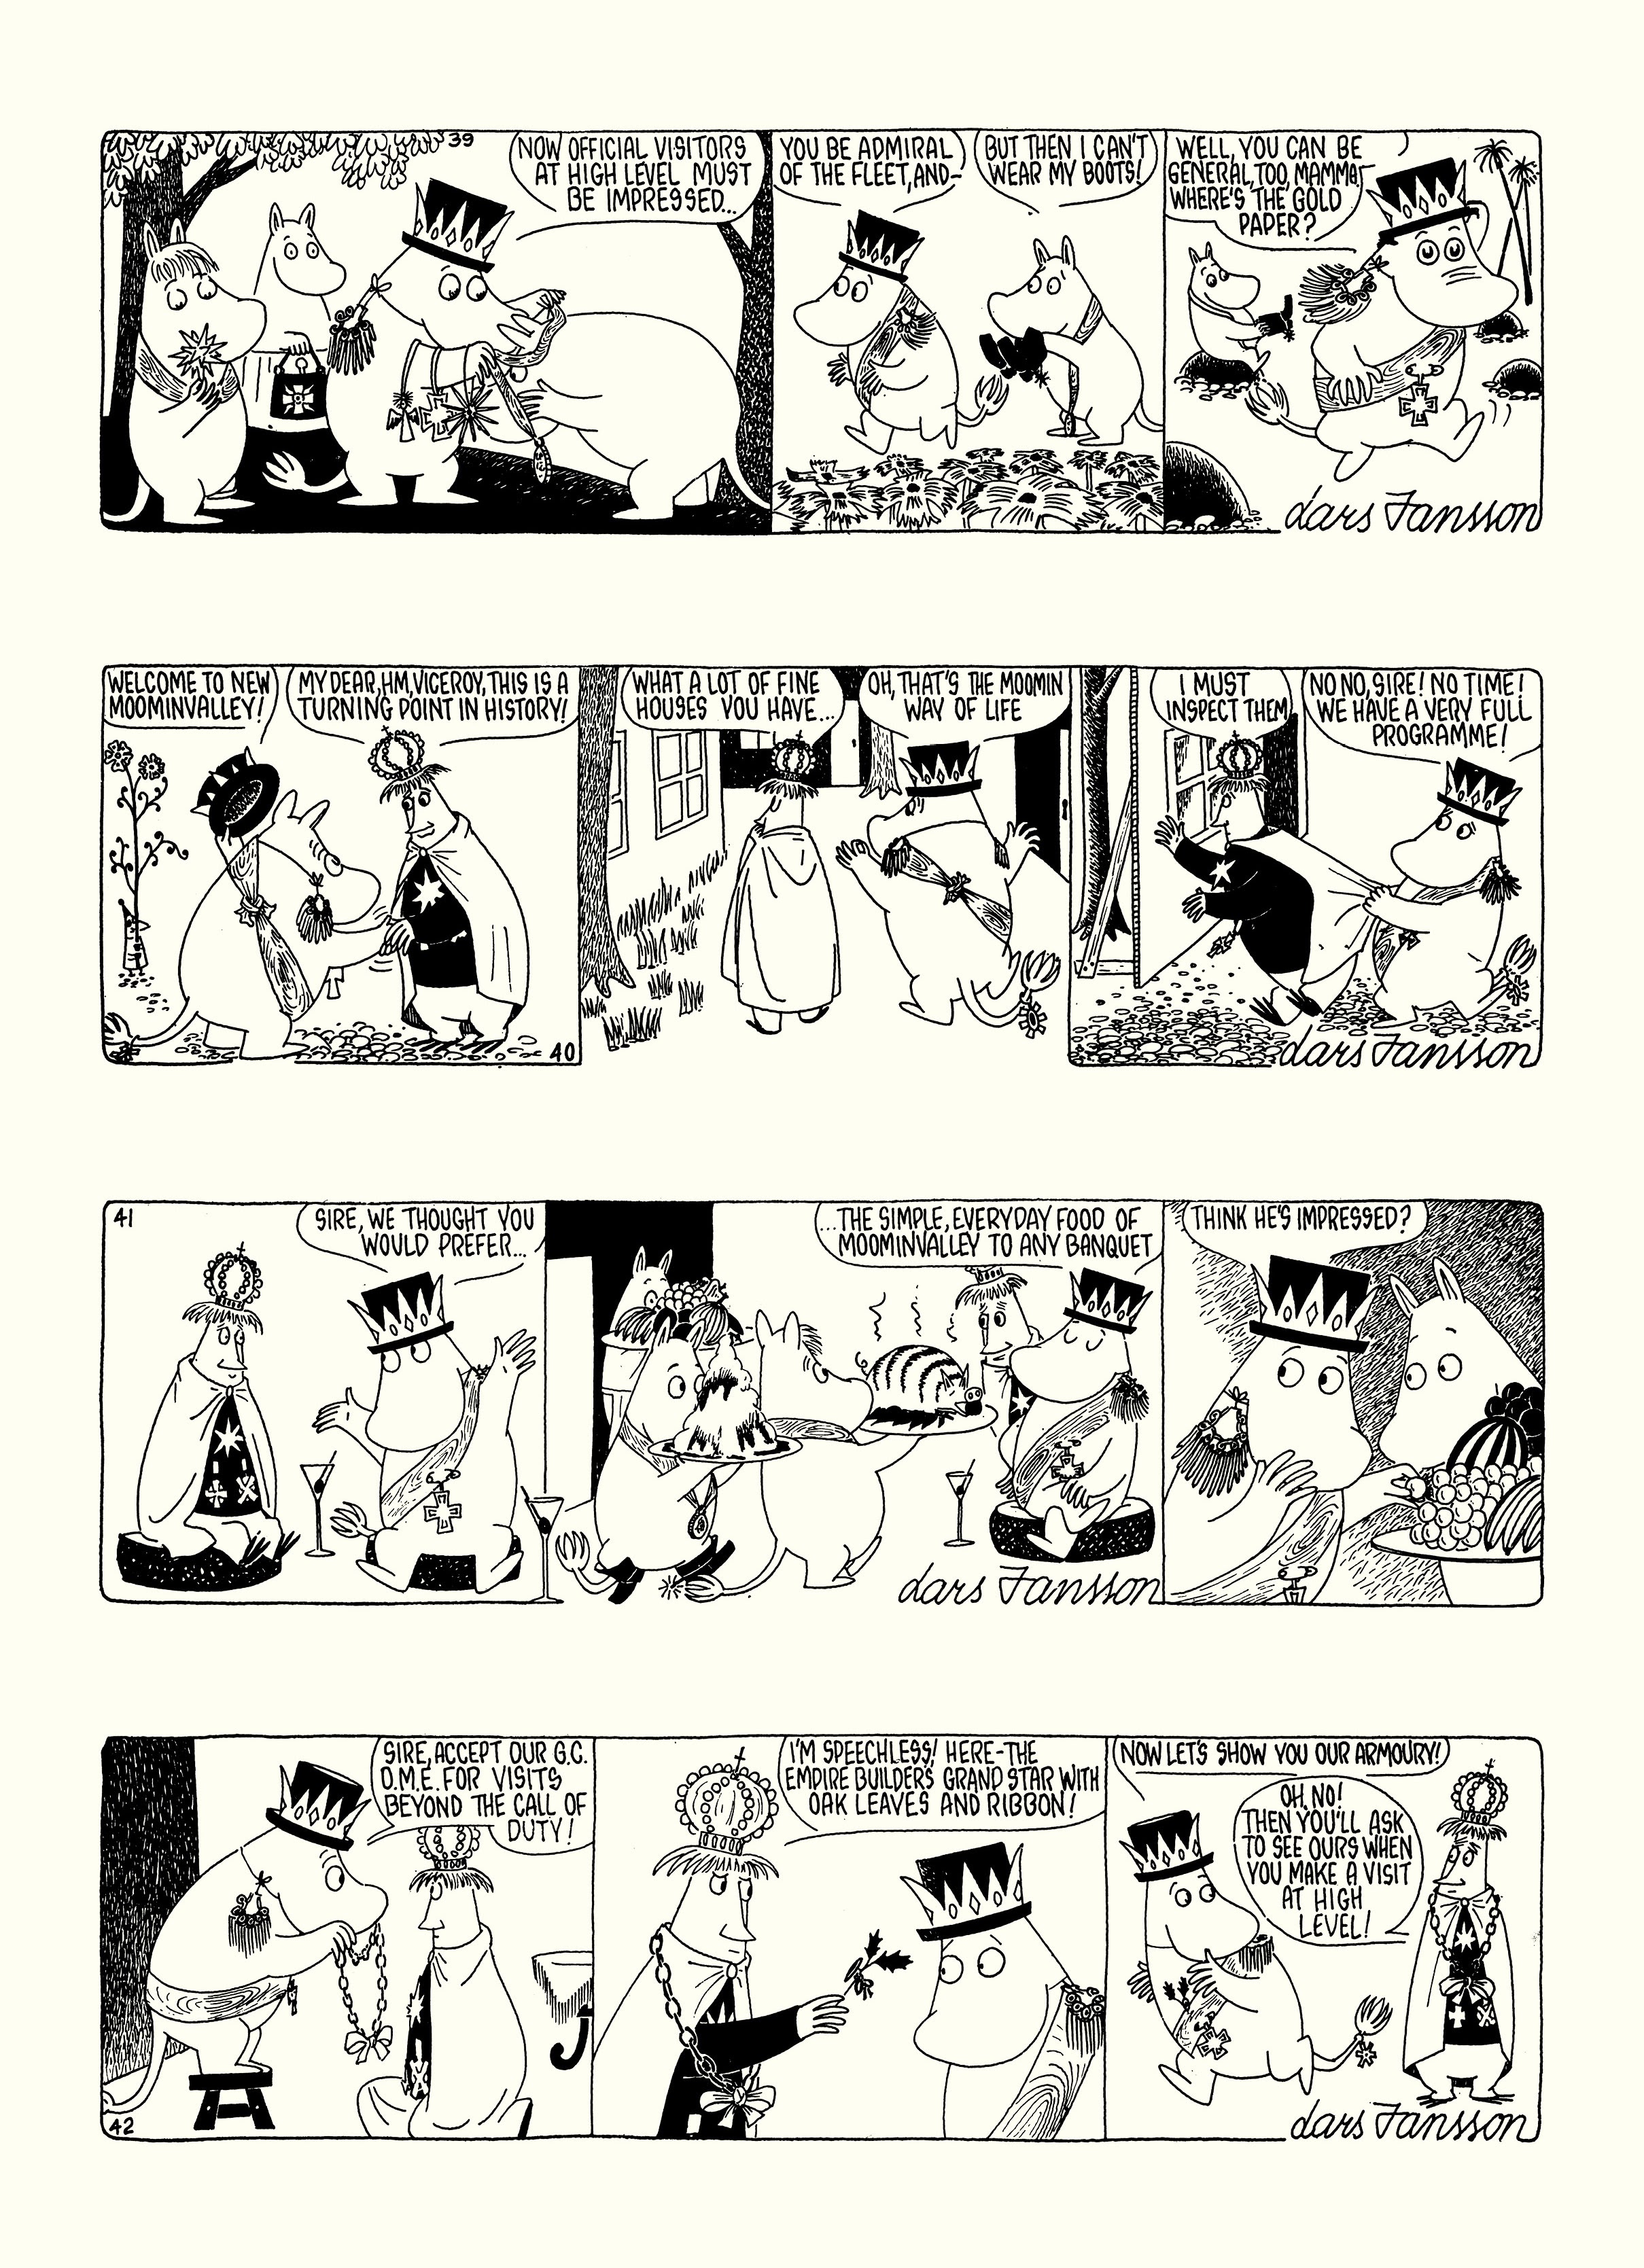 Read online Moomin: The Complete Lars Jansson Comic Strip comic -  Issue # TPB 7 - 16